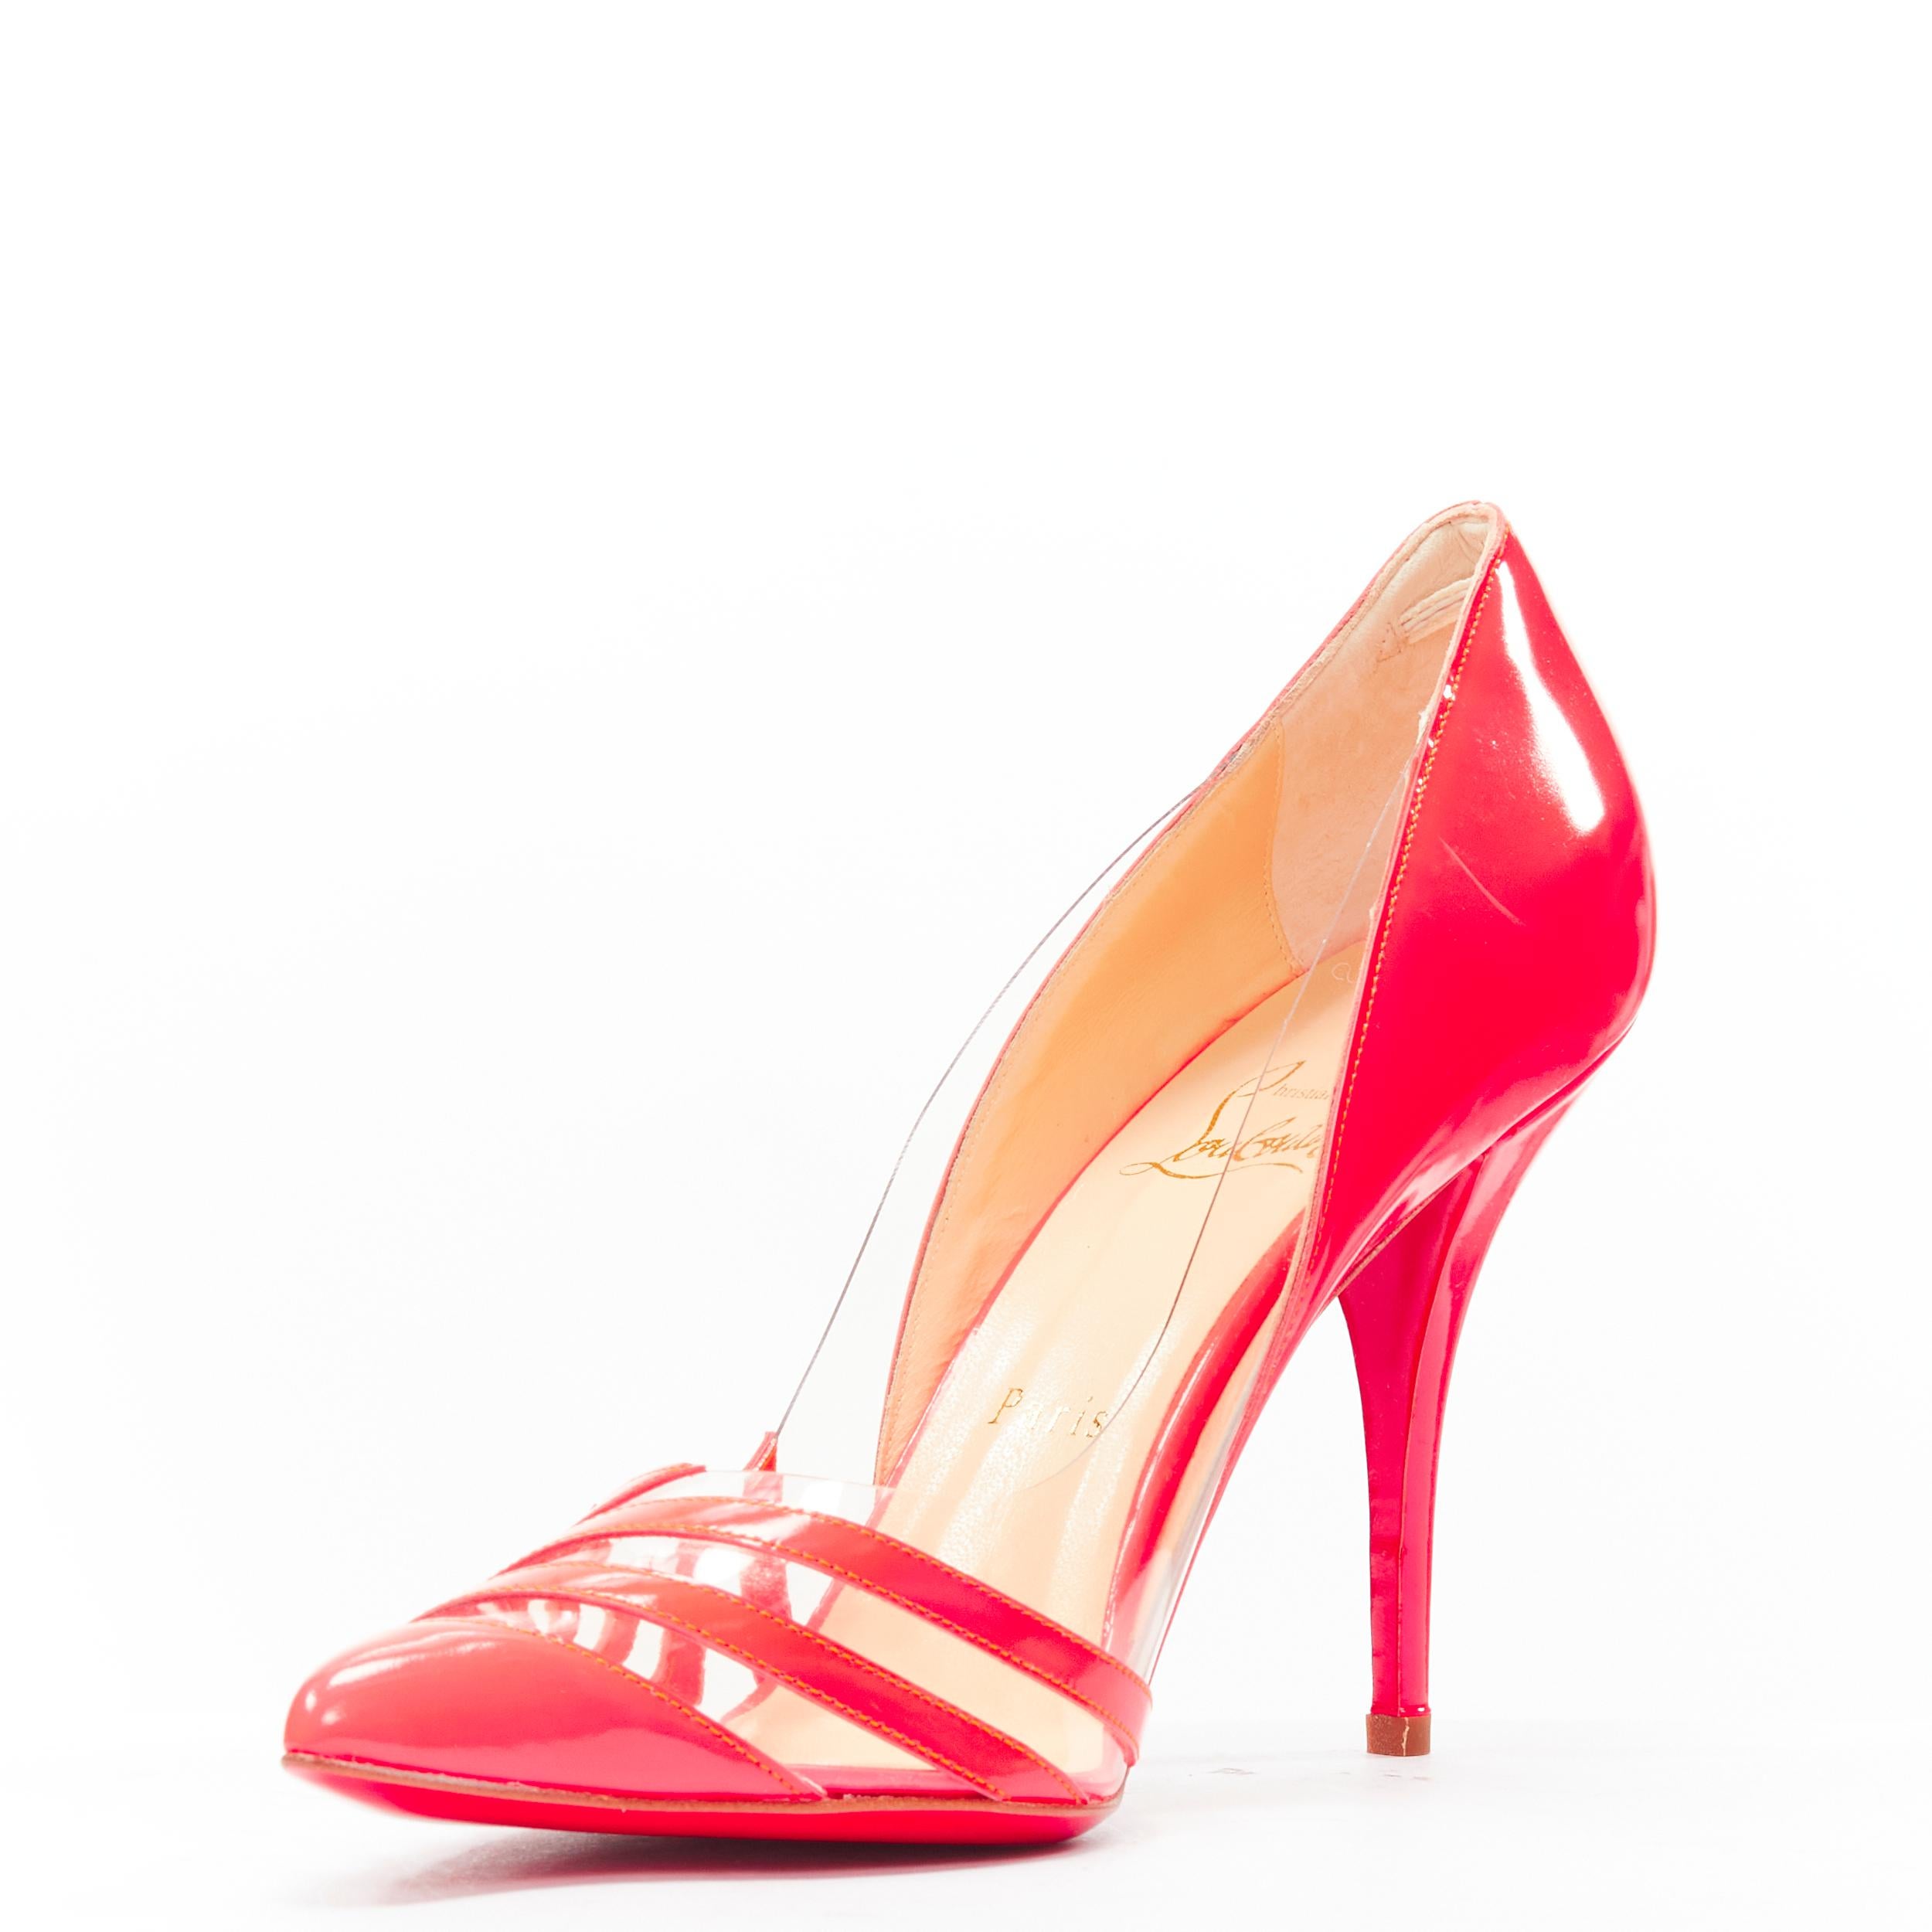 CHRISTIAN LOUBOUTIN Pivichic 100 neon pink striped patent pigalle pump EU37.5 In Excellent Condition For Sale In Hong Kong, NT